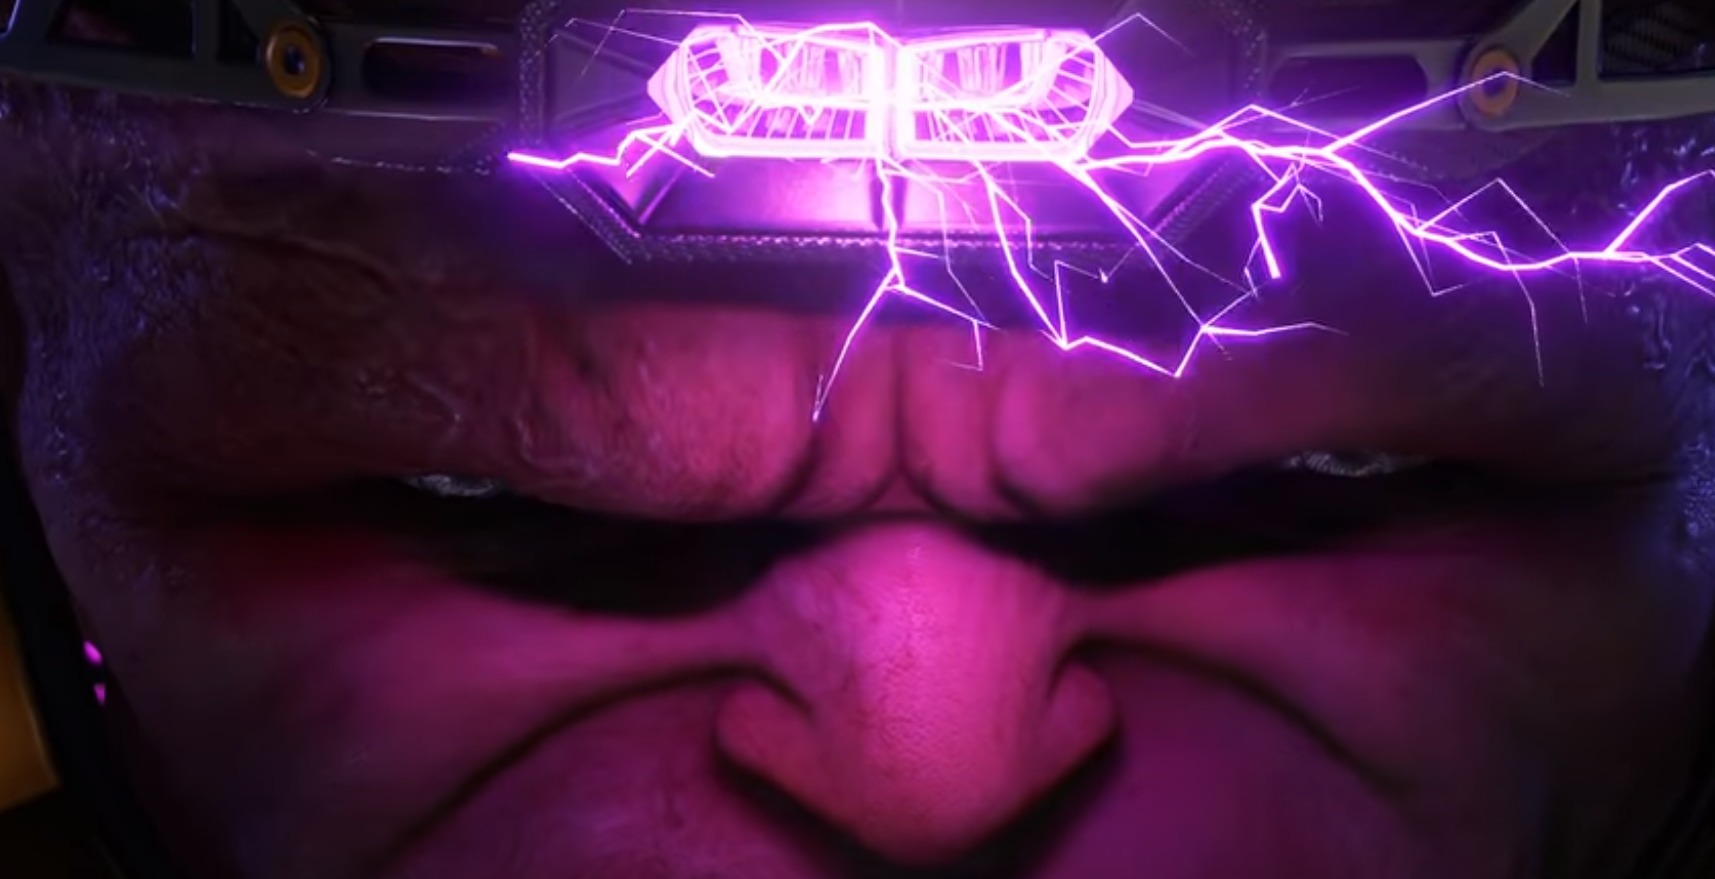 Marvel’s Avengers Reveals AIM And MODOK As The Game’s Main Villains In New Trailer